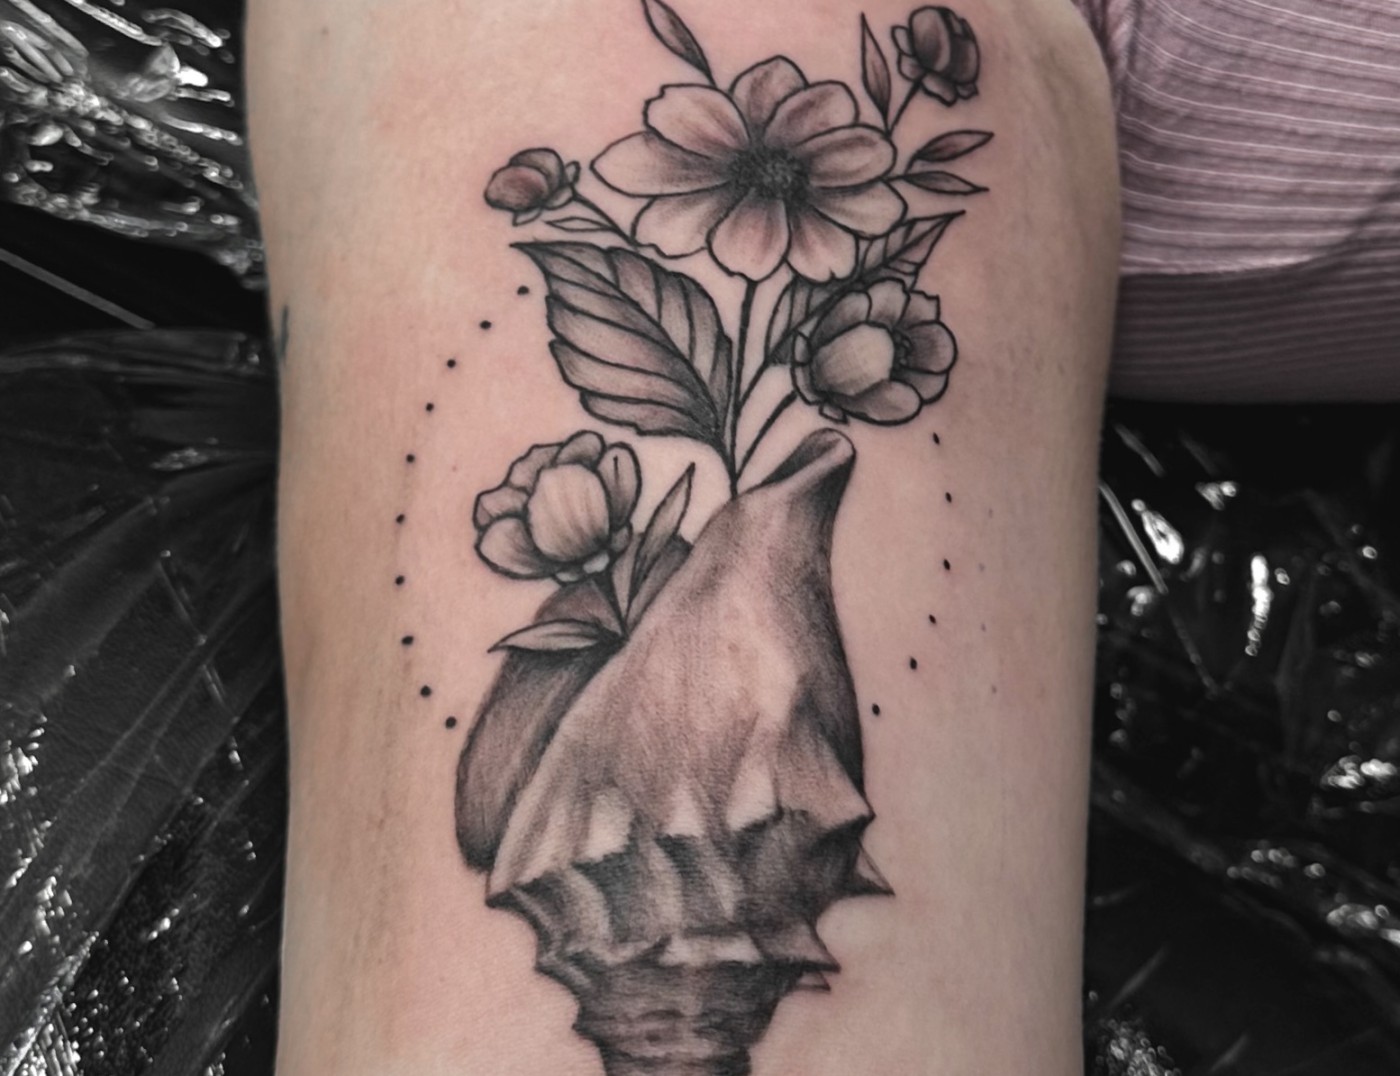 Conch Seashell With Flowers in Bloom Blackwork Tattoo By Choze at Iron Palm Tattoos in downtown Atlanta, Georgia. Conch shells symbolize fertility as the flowers and plant life on this tattoo depict. Our most senior artist, Choze specializes in fine line blackwork tattoos but has mastered many other styles. We're Atlanta's only late night tattoo shop. Call 404-973-7828 or stop by for a free consultation. Walk Ins are welcome.